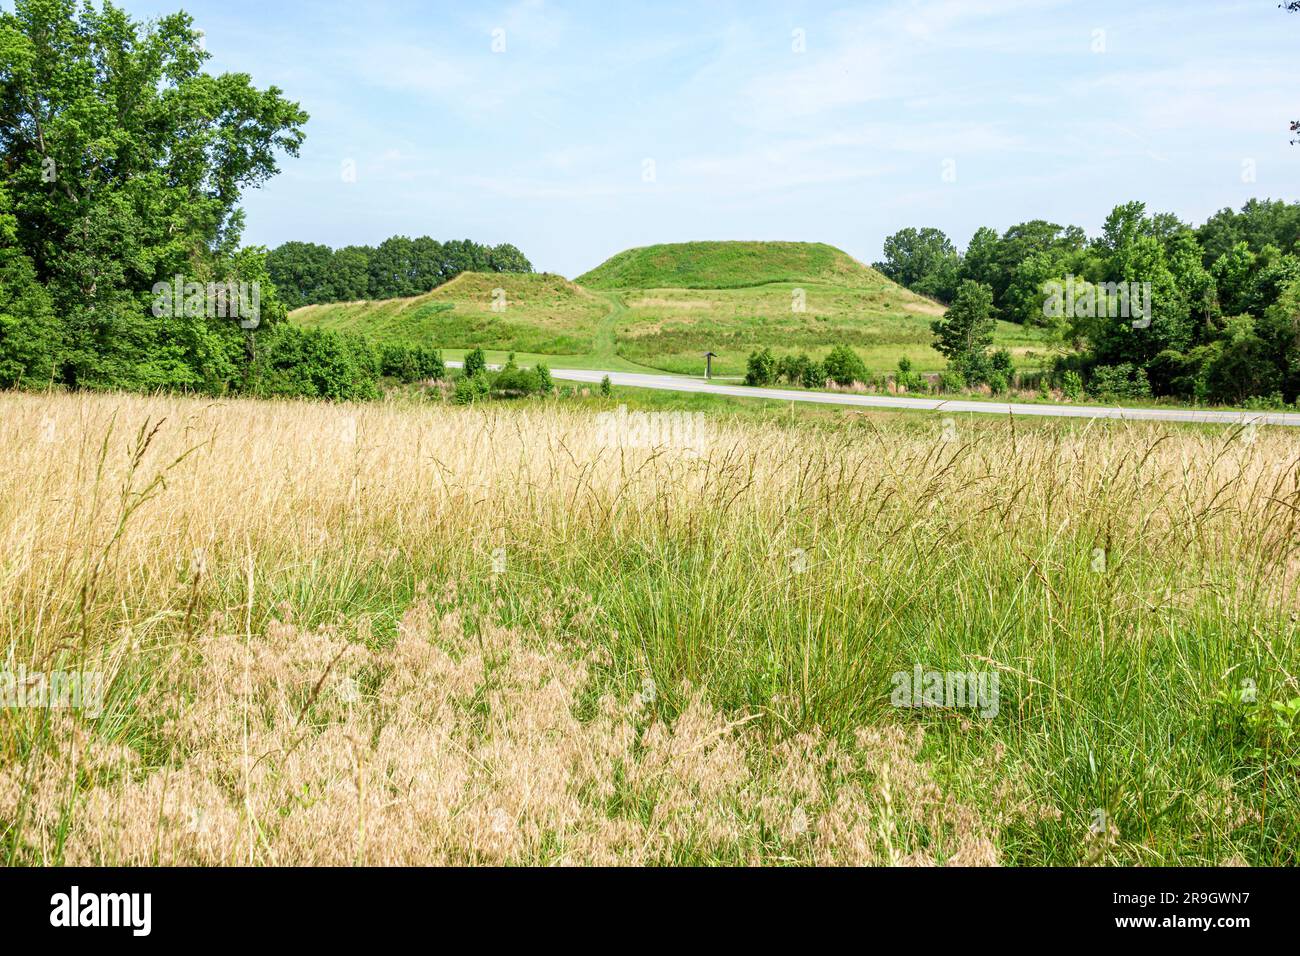 Macon Georgia,Ocmulgee Mounds National Historic Park,funeral mound,ancestral homeland of the Muscogee Creek Nation,meadow grass Stock Photo